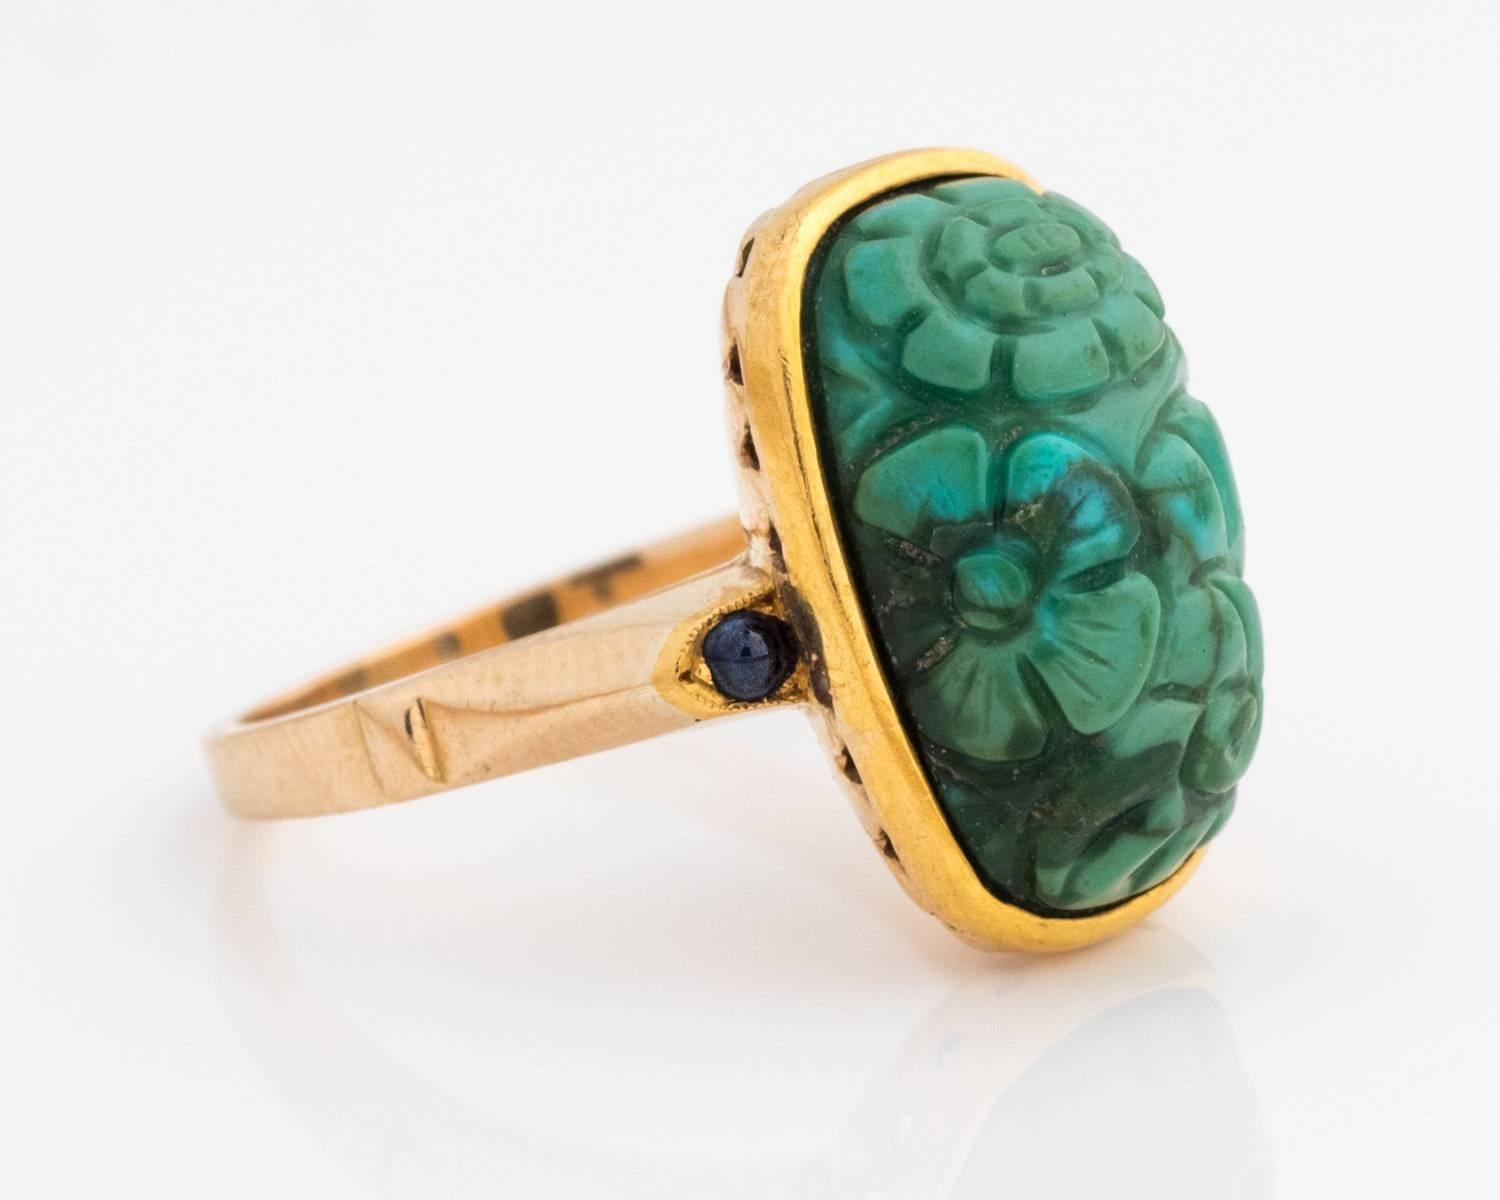 9 Karat Gold
Center Stone is Blue Turquoise Stone, measures 15.3 x 9.1 millimeter
Stone has Green Matte Hues
Ring Features Two Natural Sapphire Round Cabochons, Blue in Color
Along the edge of the Sapphires there are additional milgrain